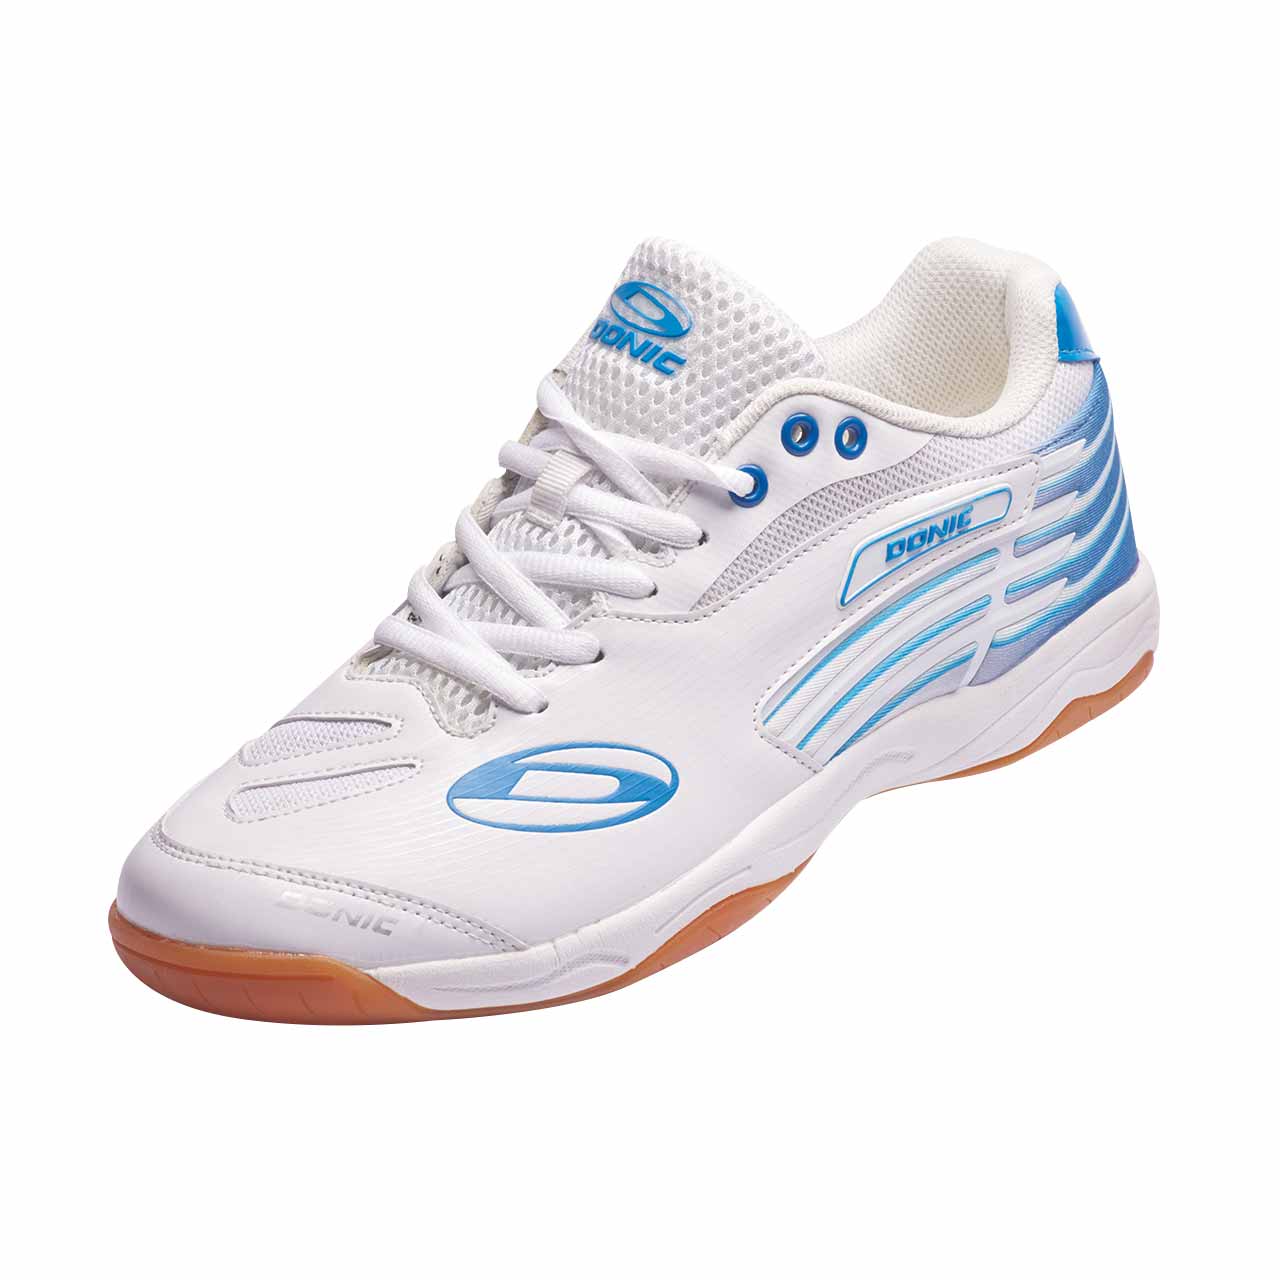 DONIC - shoes Spaceflex white